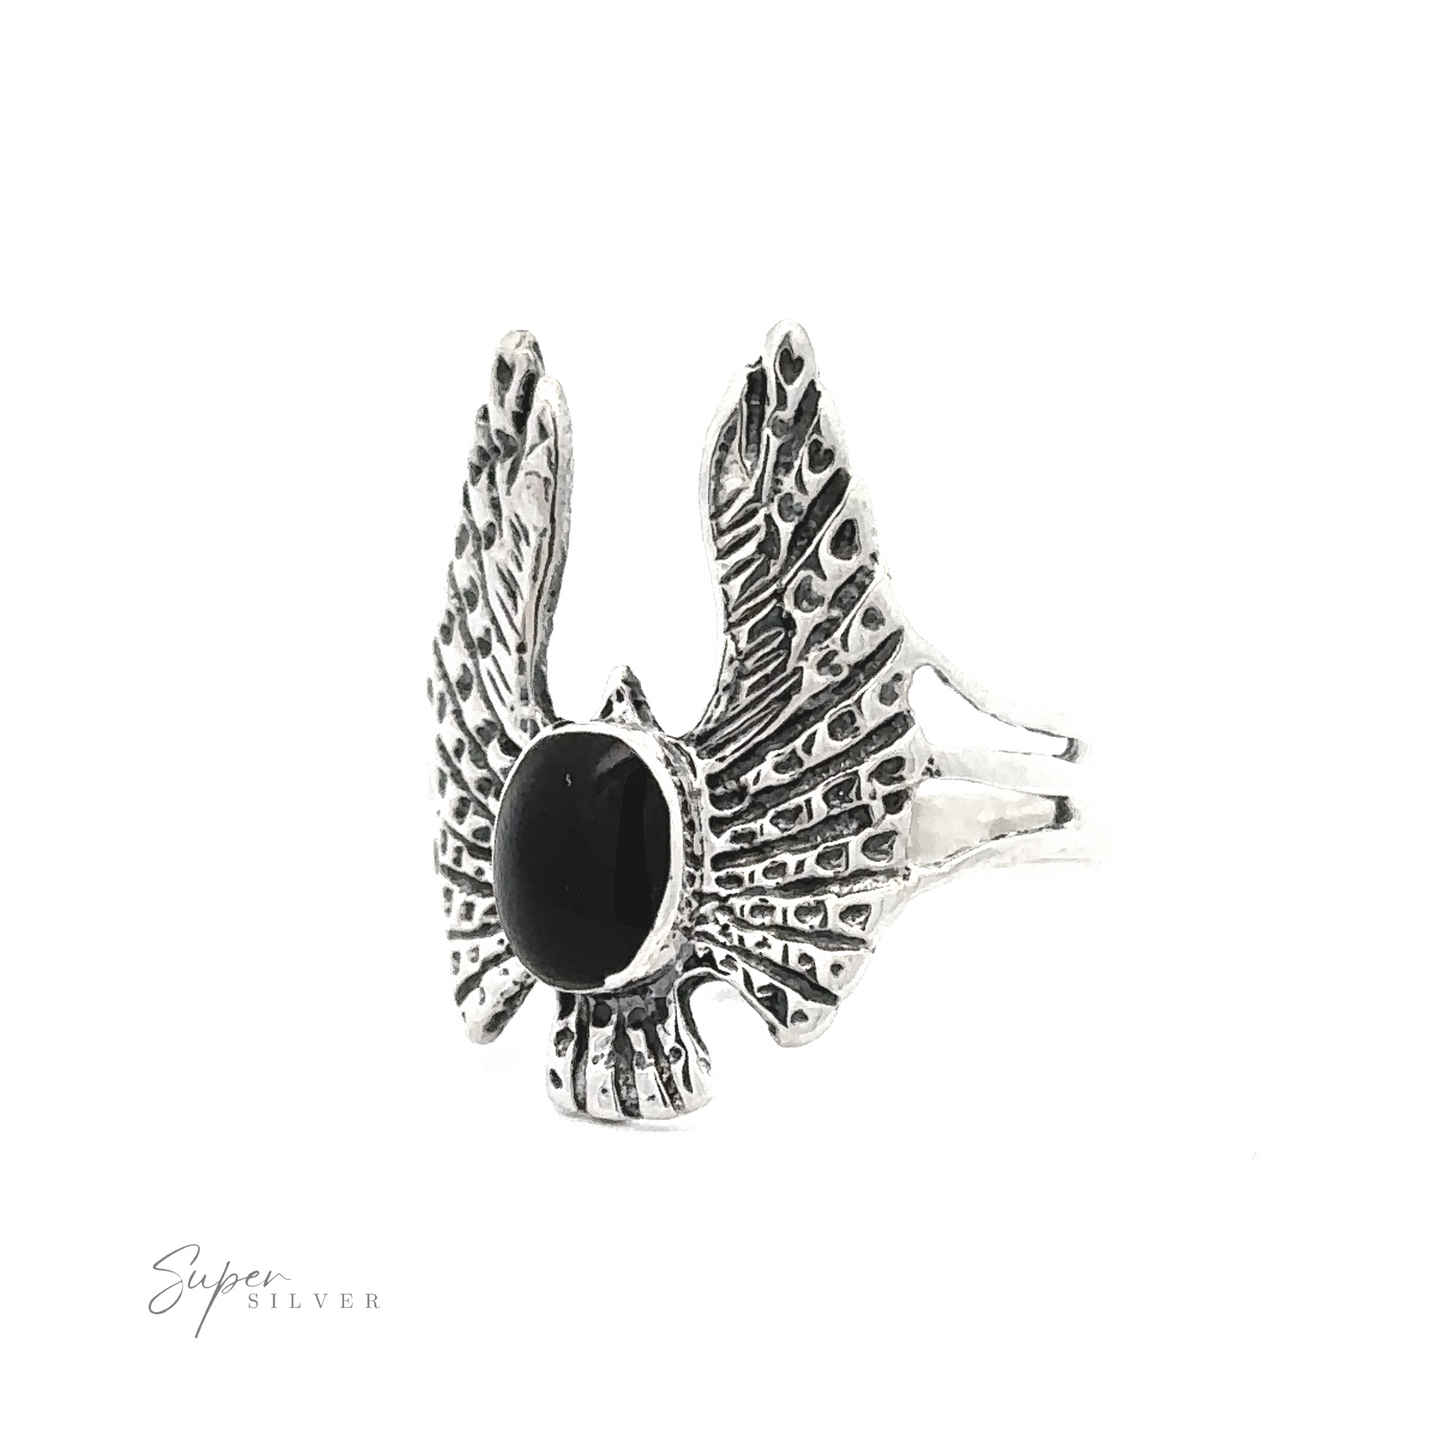 
                  
                    Inlaid Stone Ring with Eagle Wings designed as two eagle wings embracing a black stone, displayed against a white background with a "super silver" watermark.
                  
                